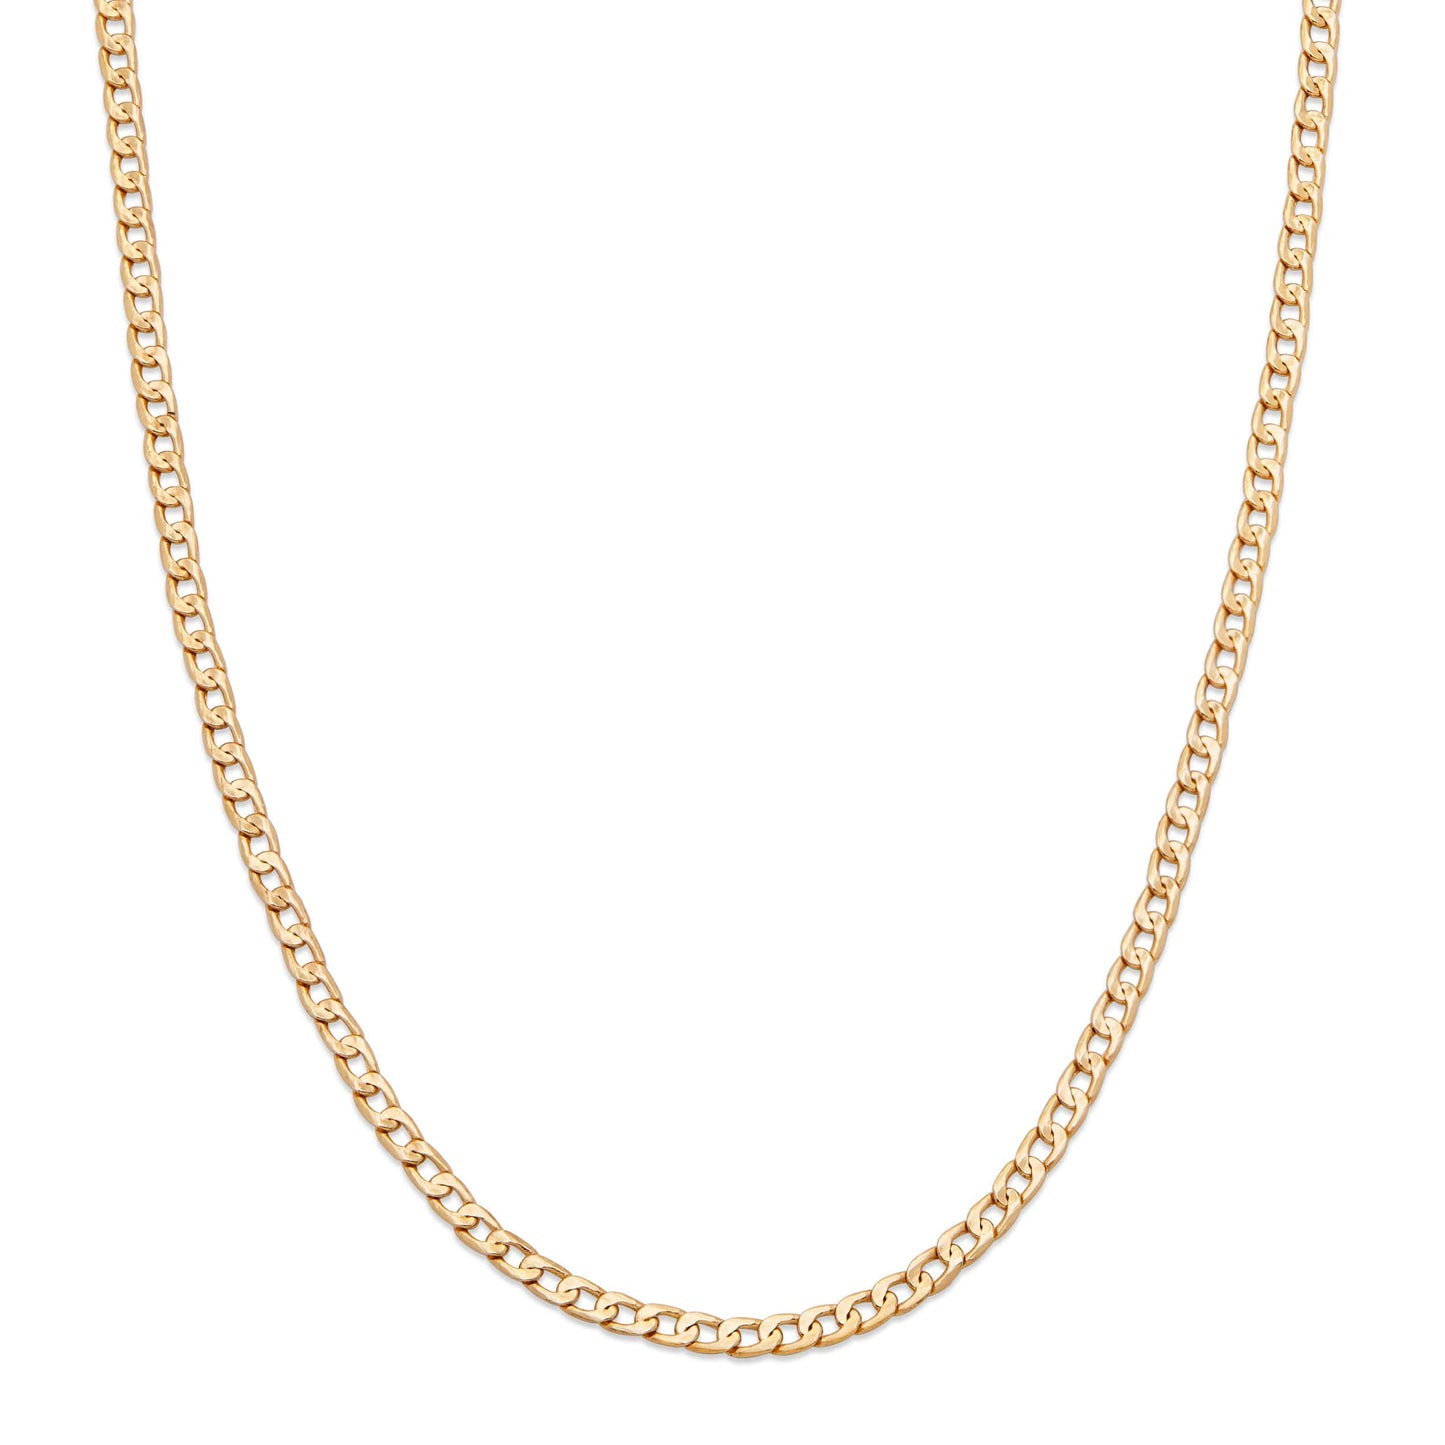 MONDO CATTOLICO Jewelry Cm 60 (23.6 in) 18 kt Yellow Gold Curb Chain